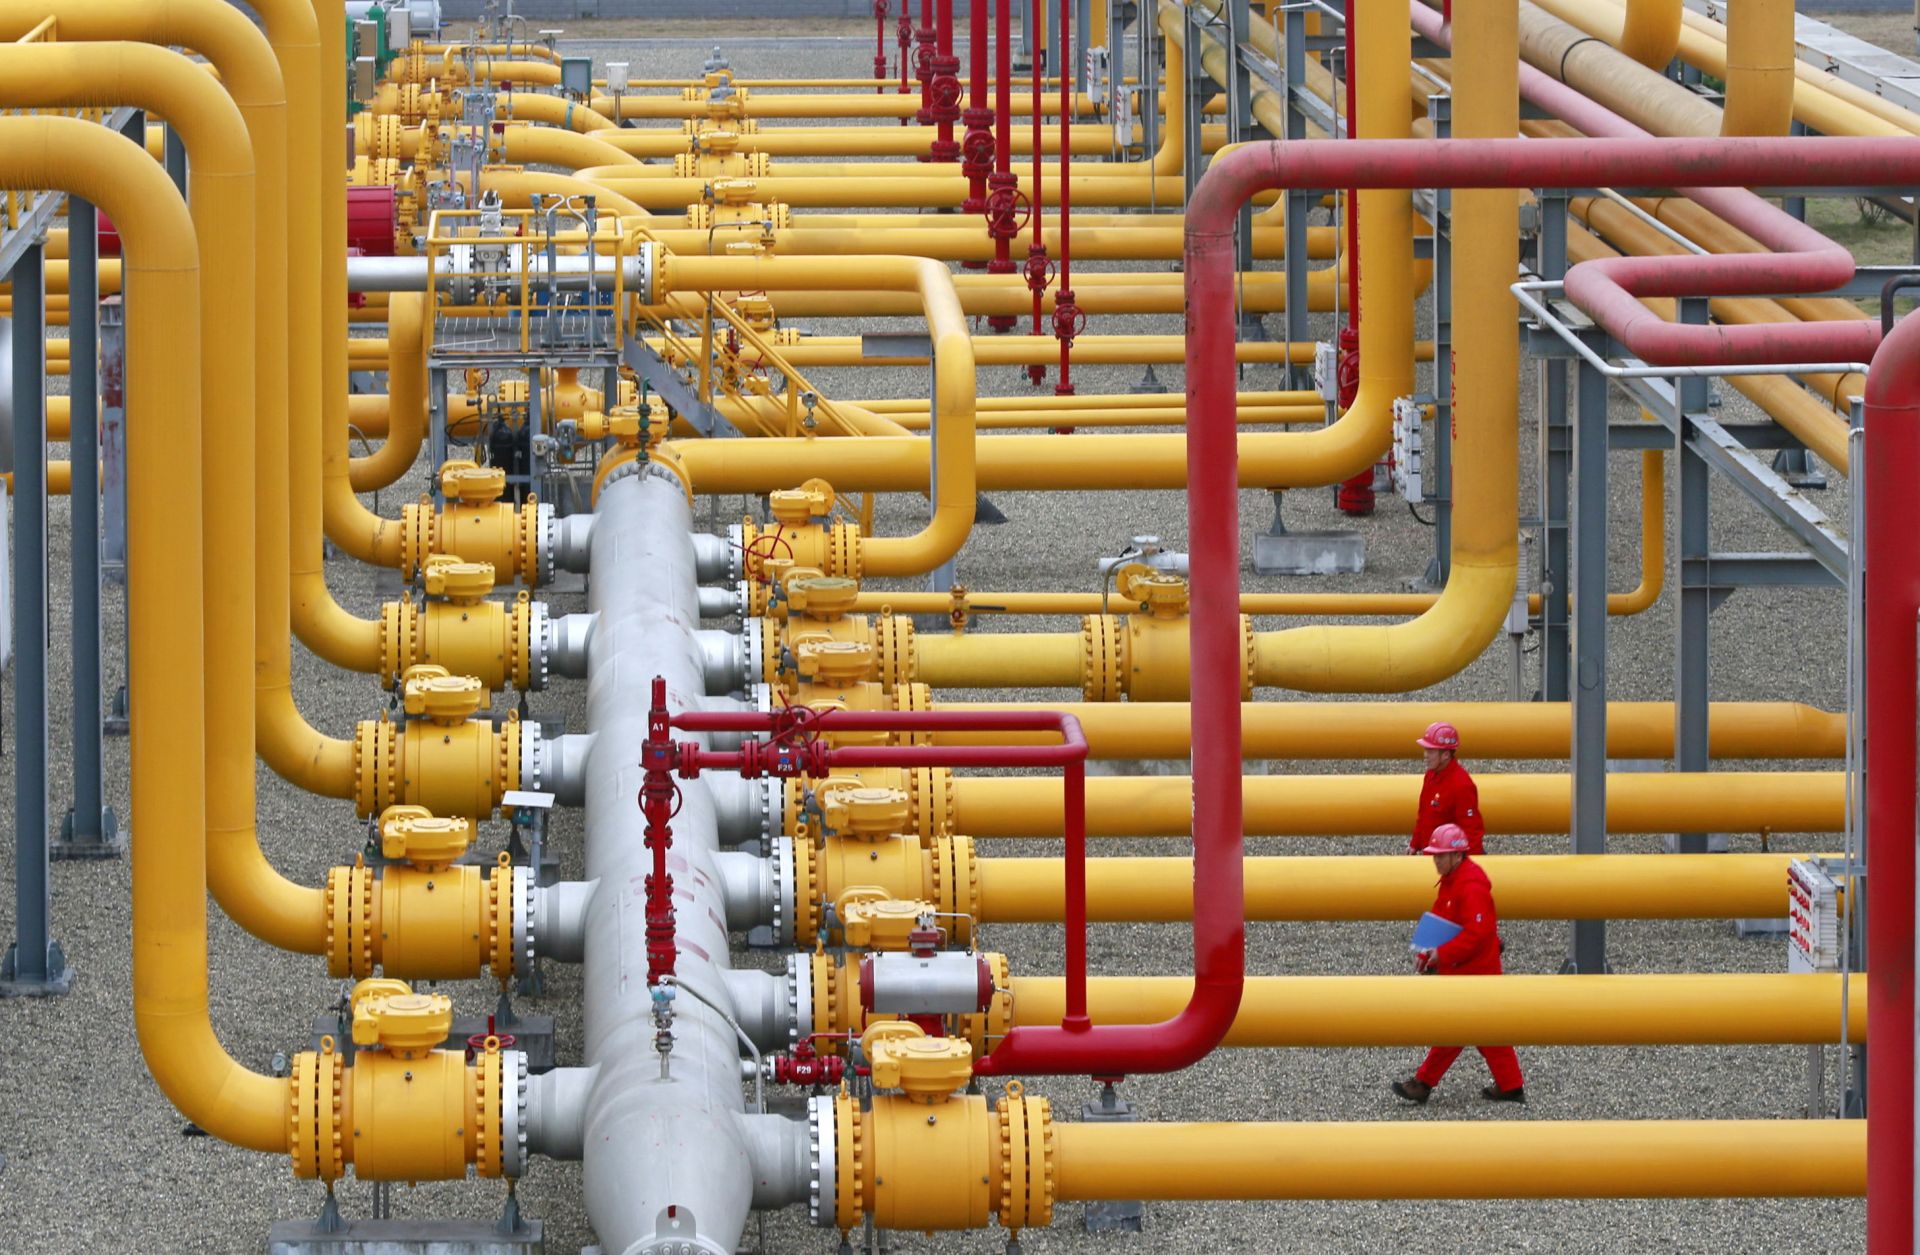 Employees of PetroChina Southwest Oil & Gasfield Co., a CNPC subsidiary, work at a natural gas purification plant in Suining in southwest China's Sichuan province on Jan. 15, 2020.